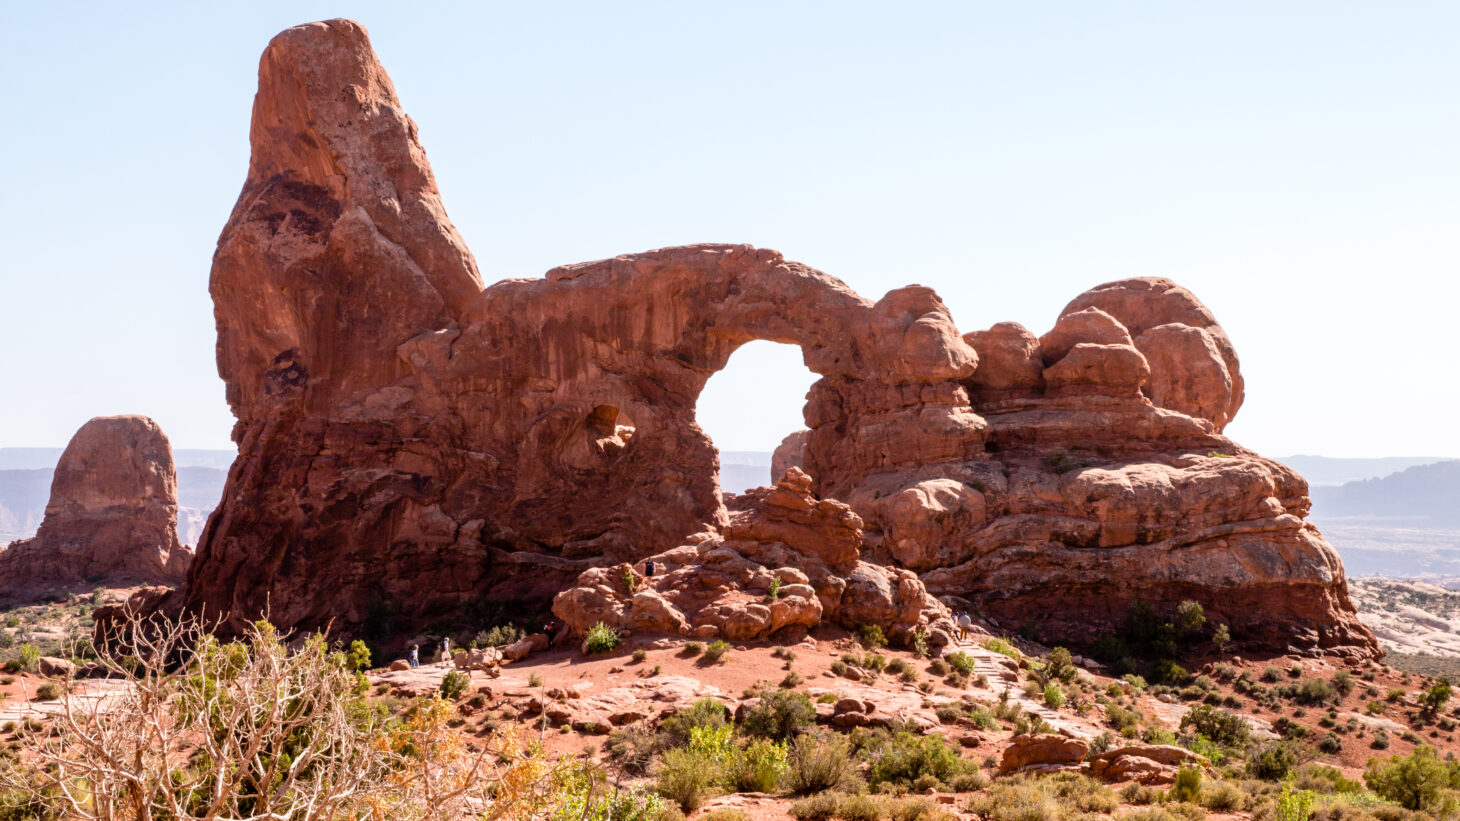 Arched rock formation at Arches National Park